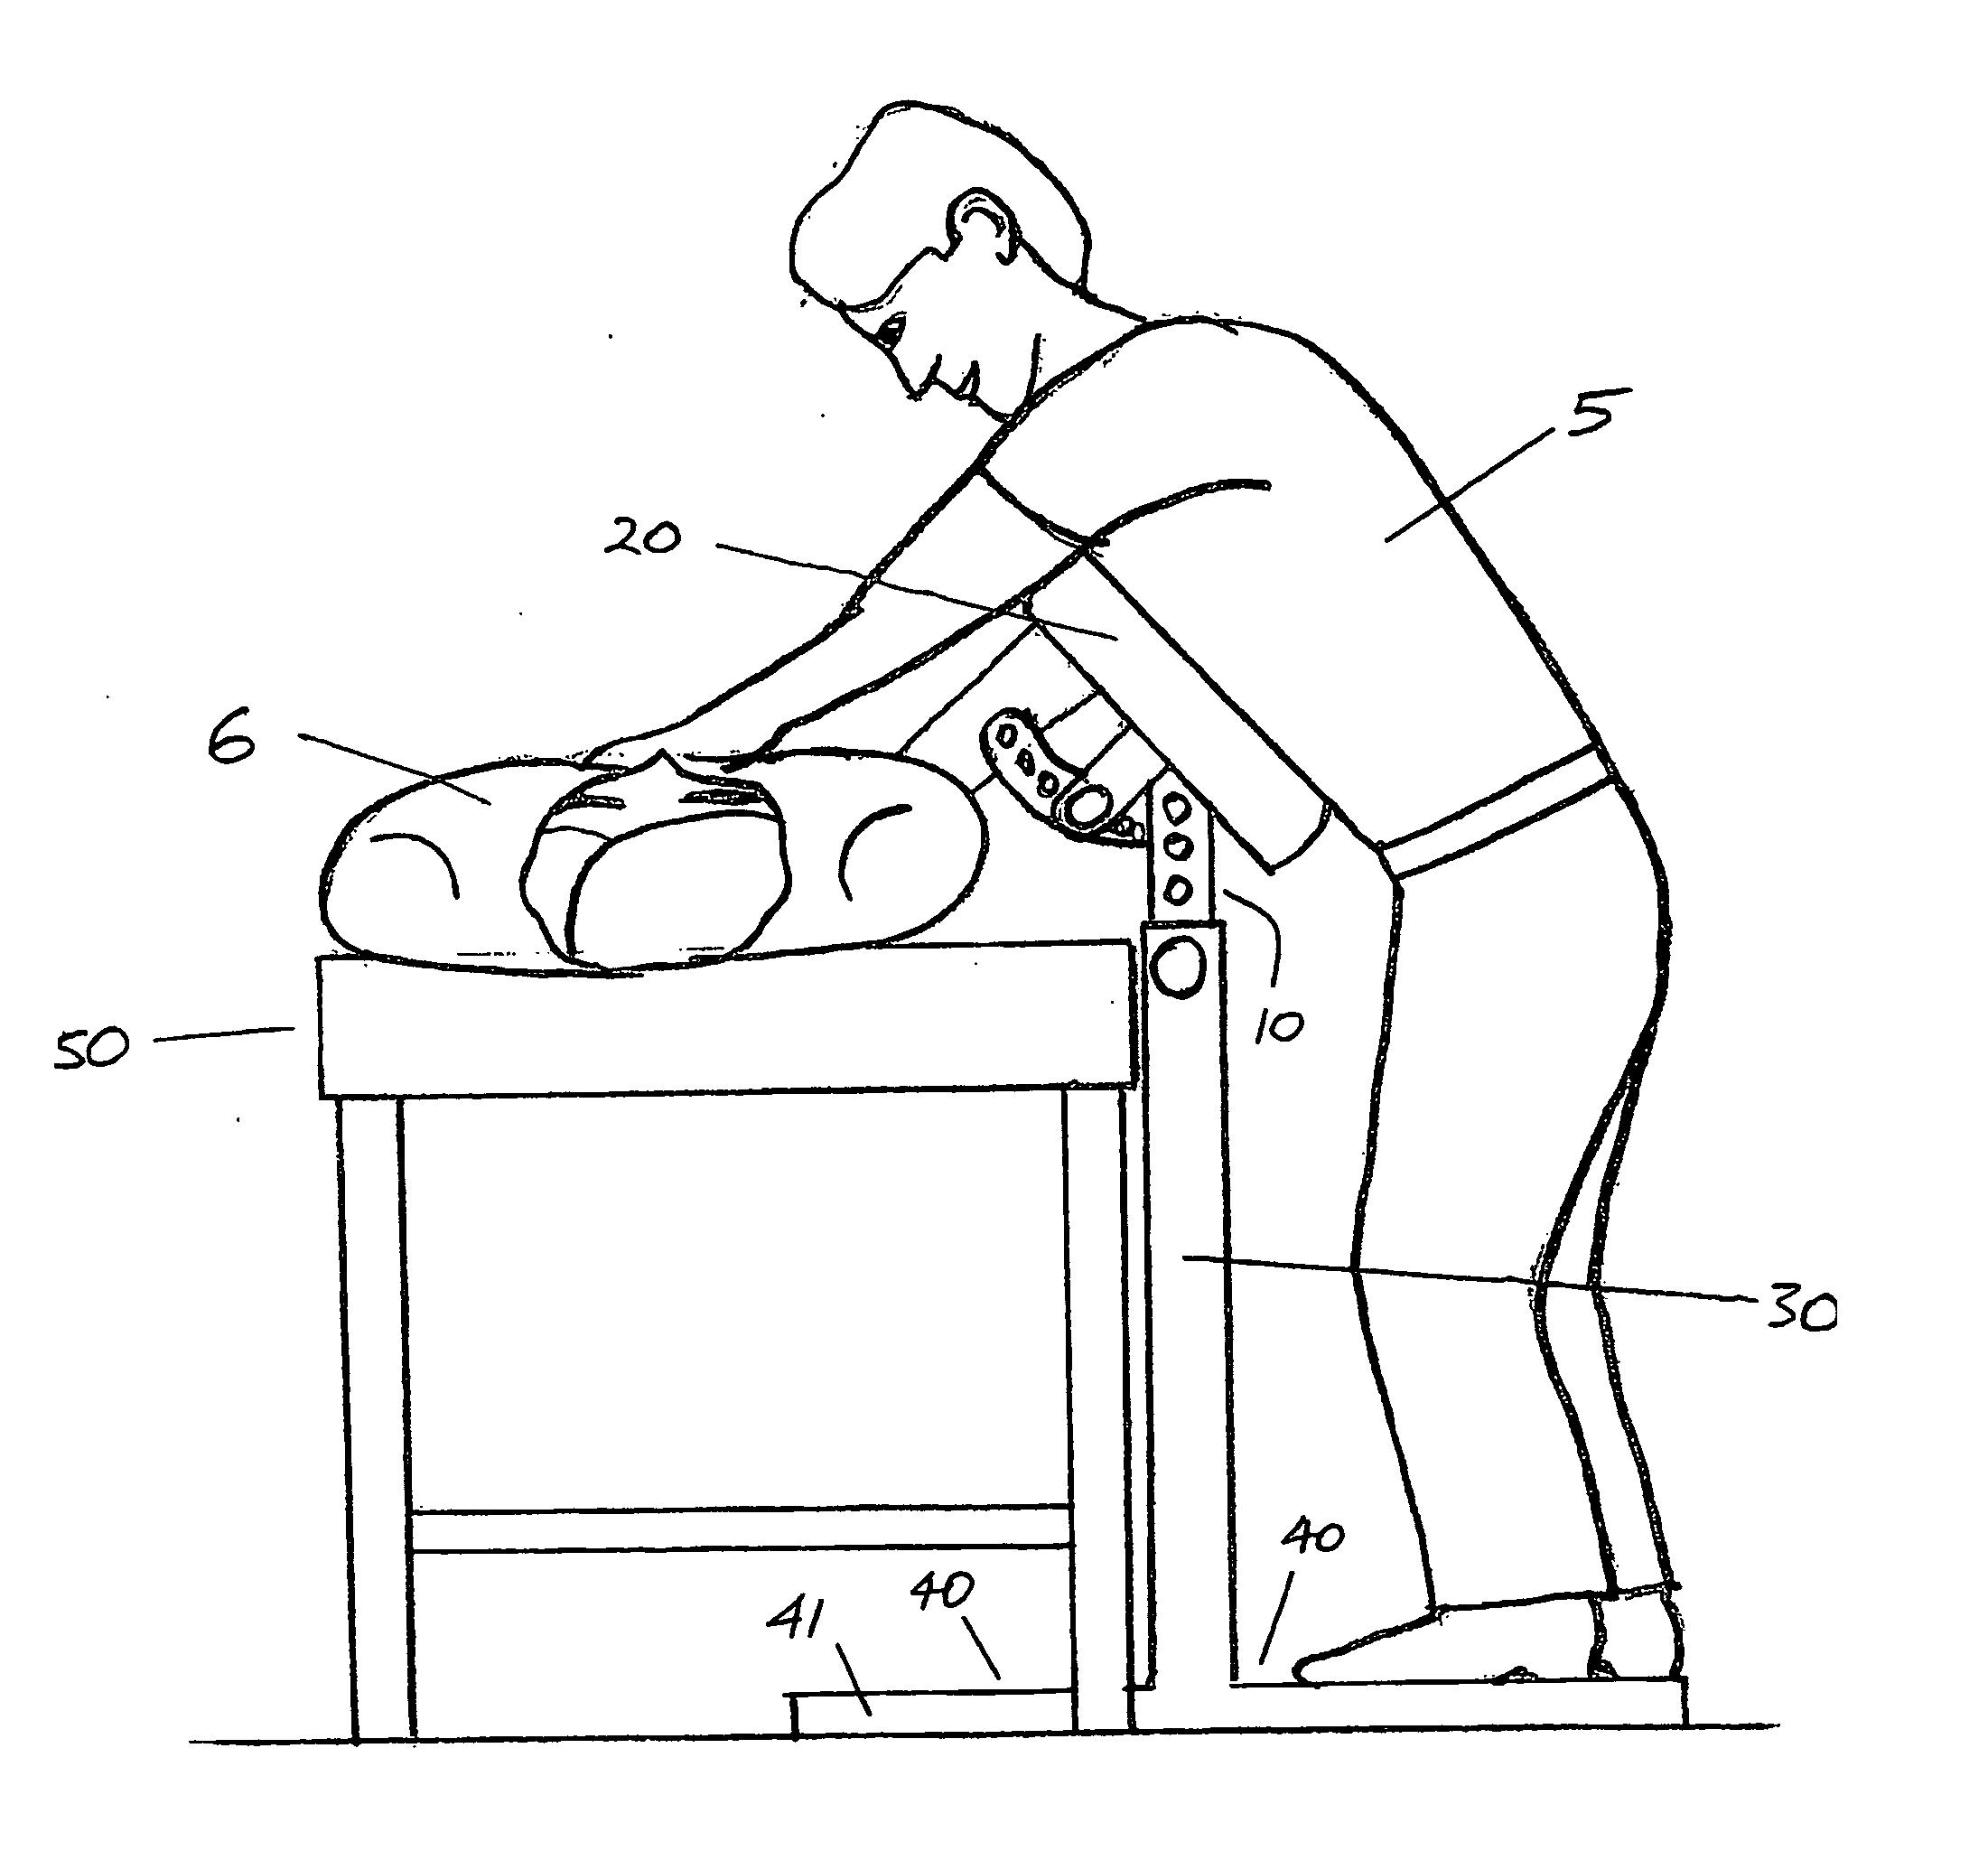 Upper-body support device and method